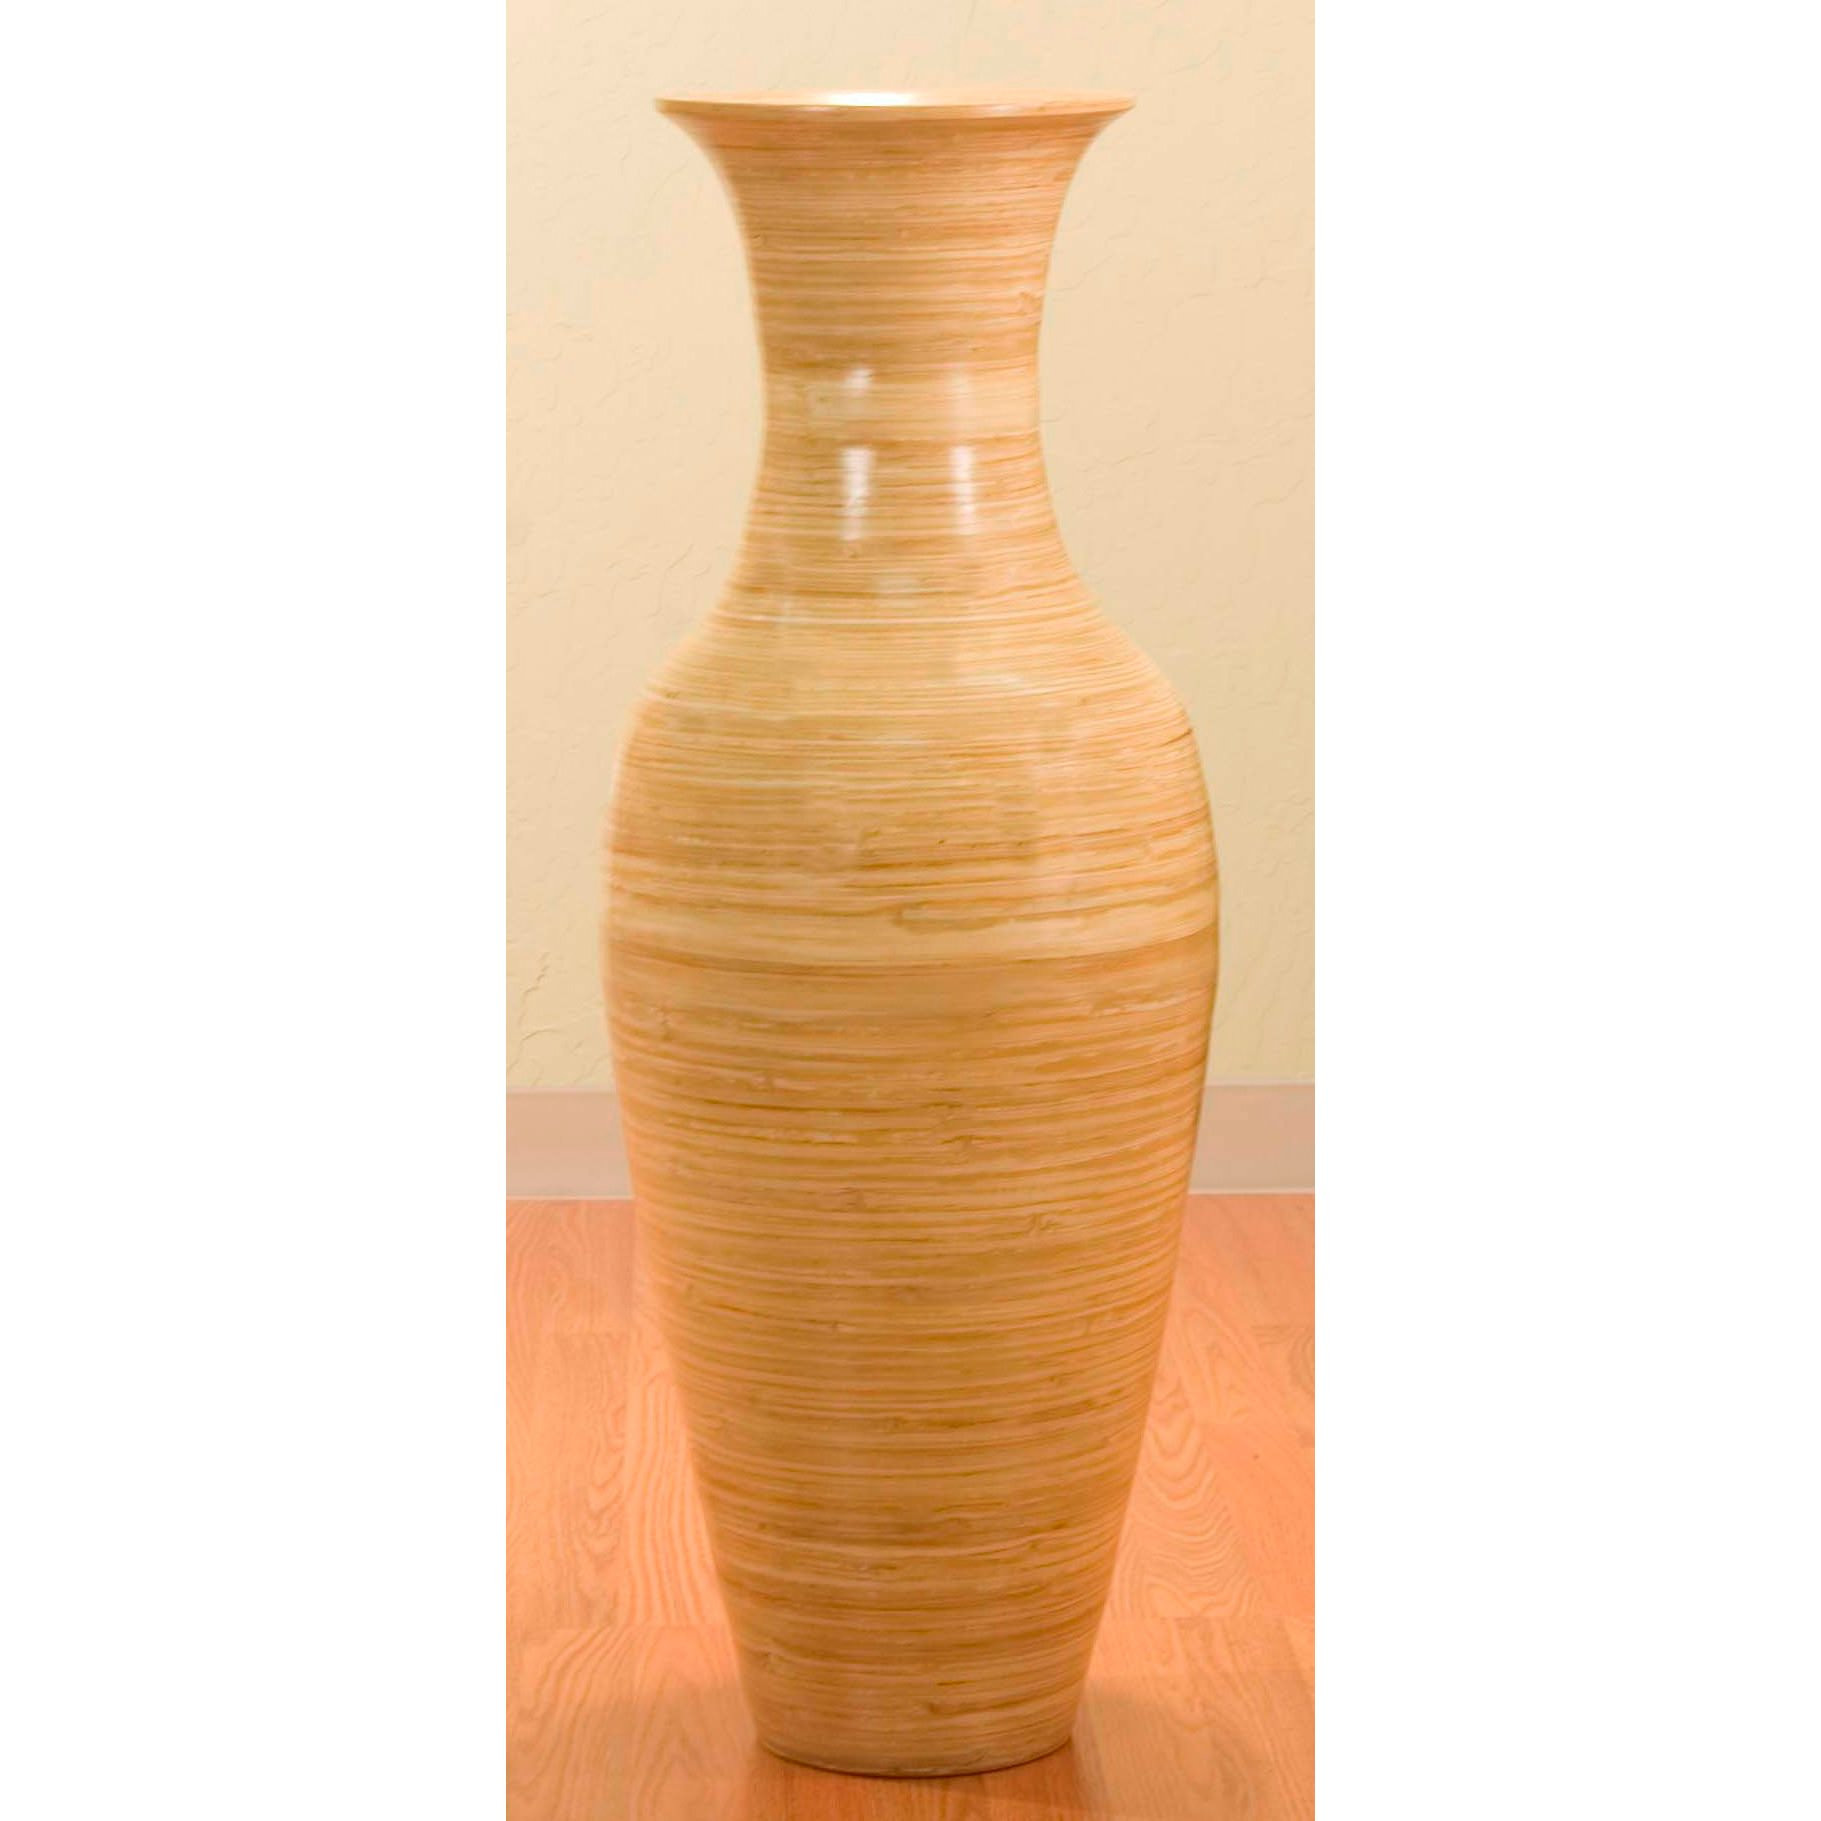 25 Unique Large Tall Floor Vases 2024 free download large tall floor vases of 36 inch floor vases migrant resource network in 36 inch bamboo tall floor vase ebay